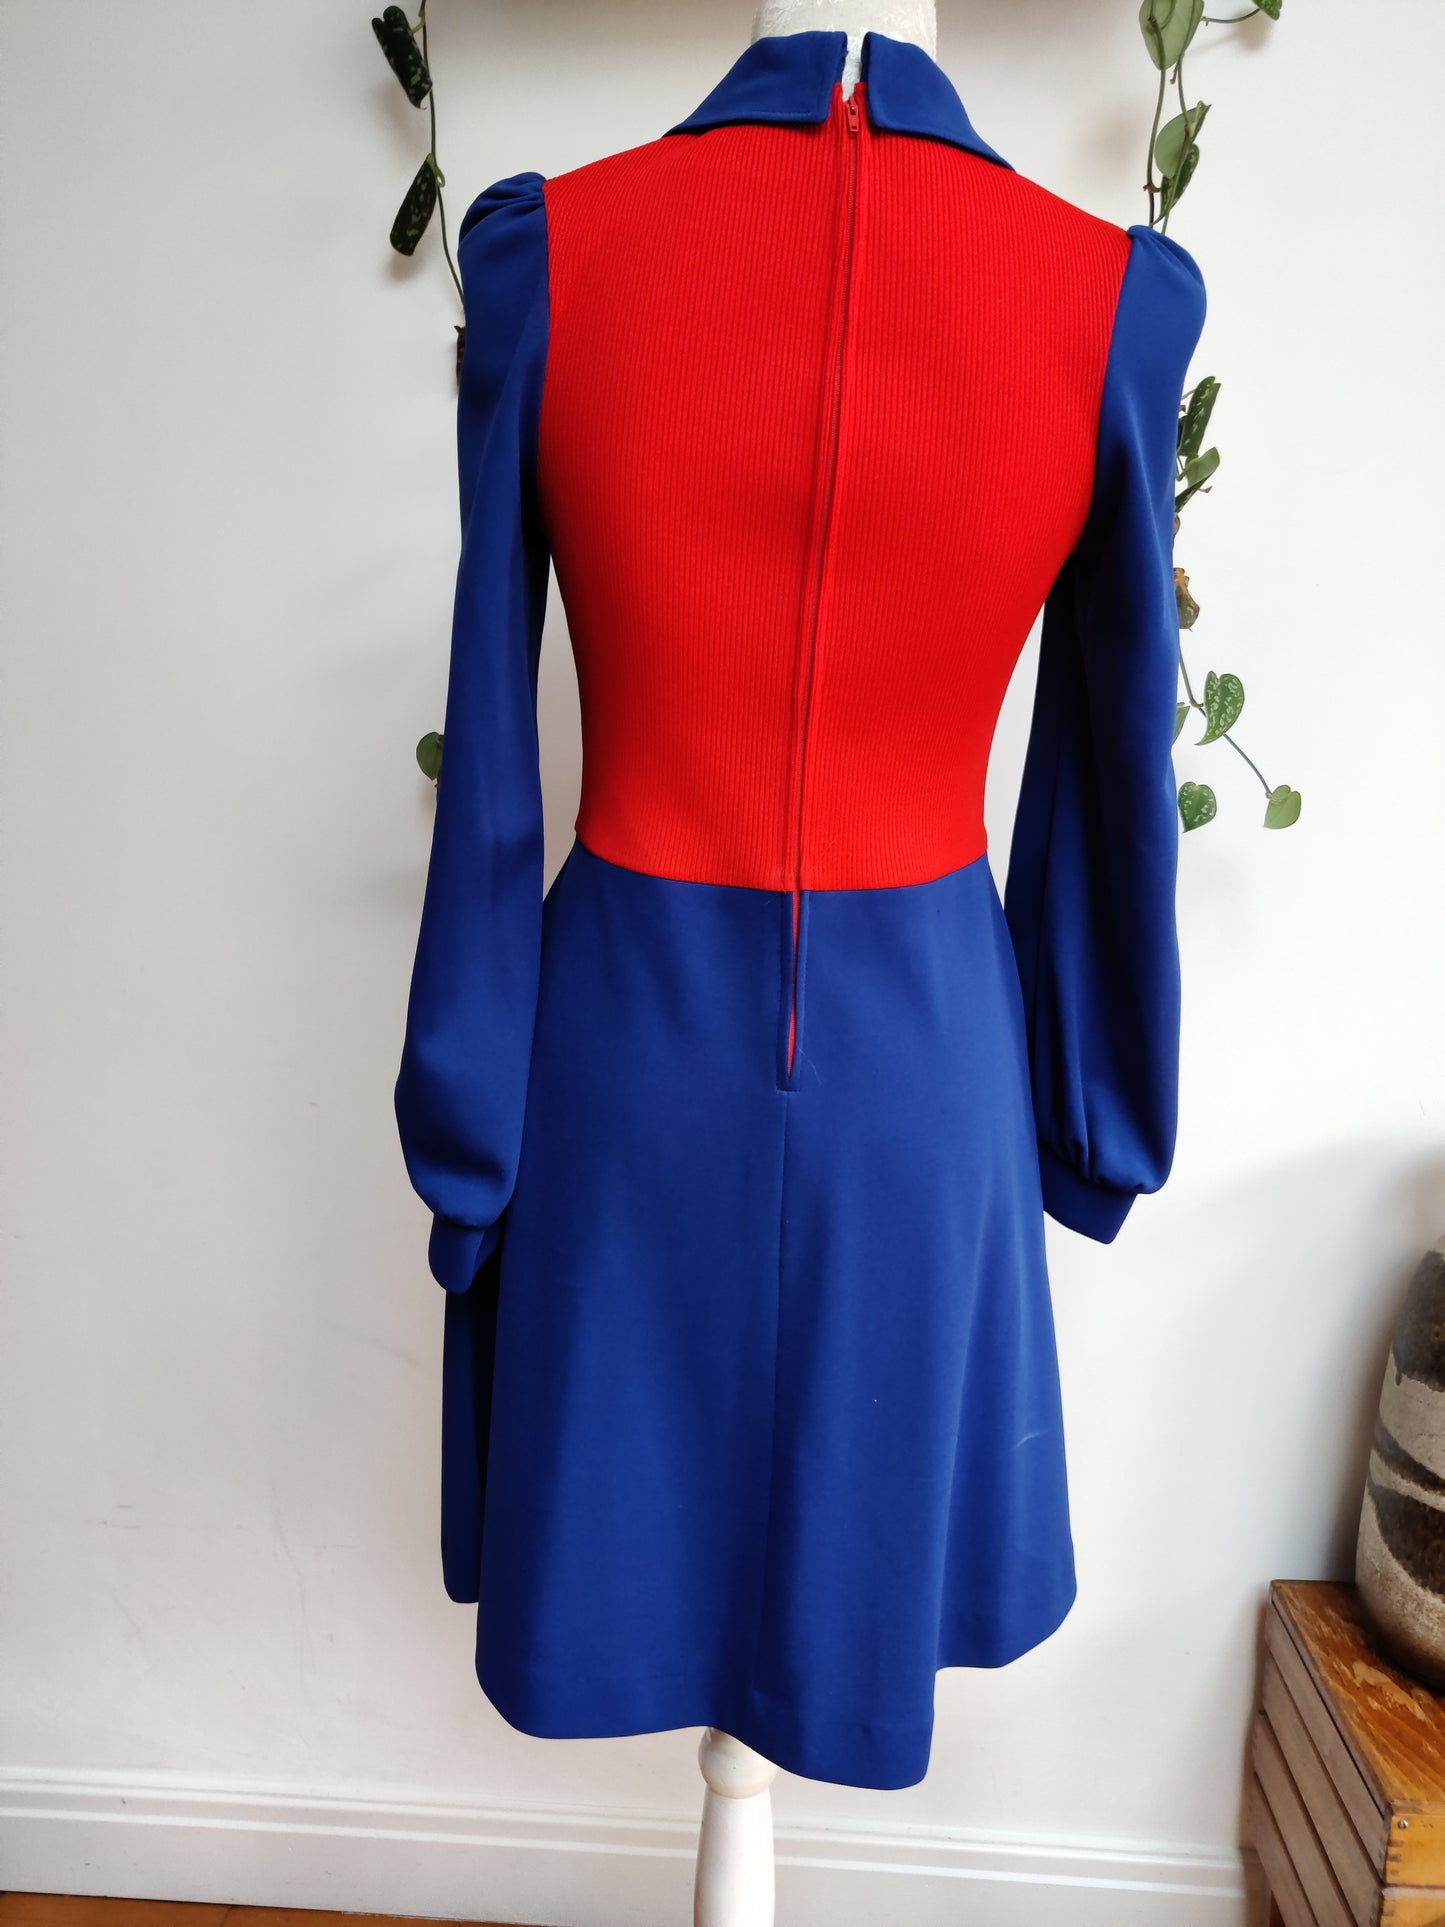 Stunning red and blue vintage mod dress. Size 10.